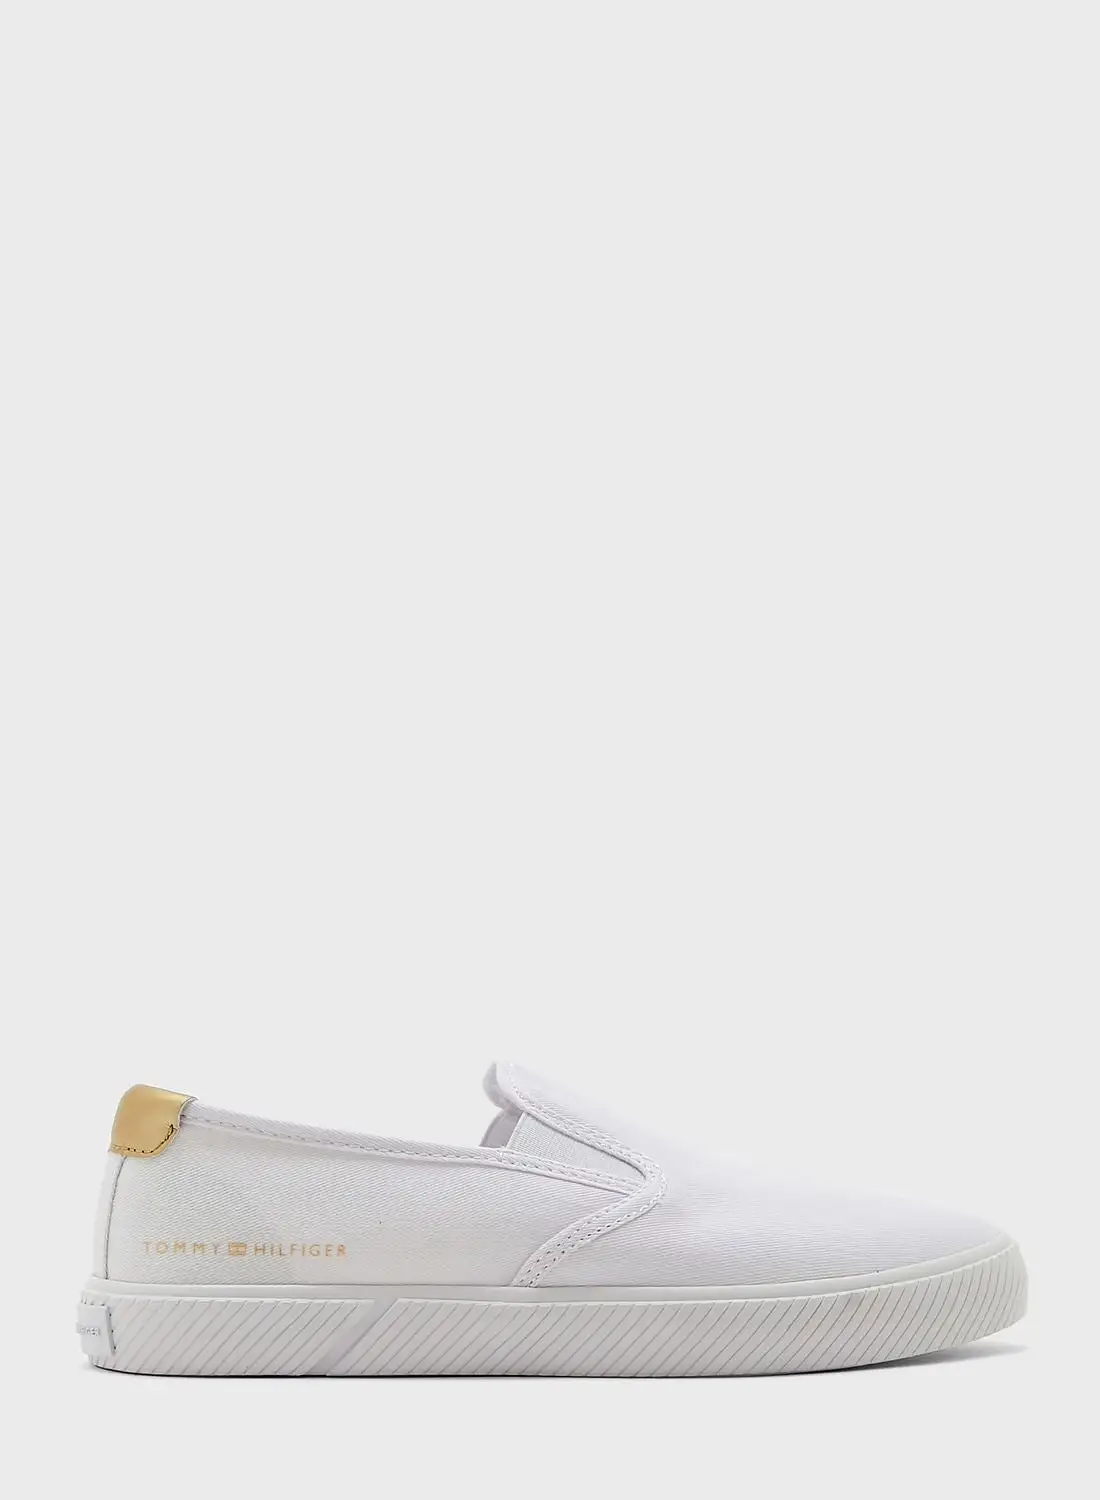 TOMMY HILFIGER Essential Low-Top Sneakers